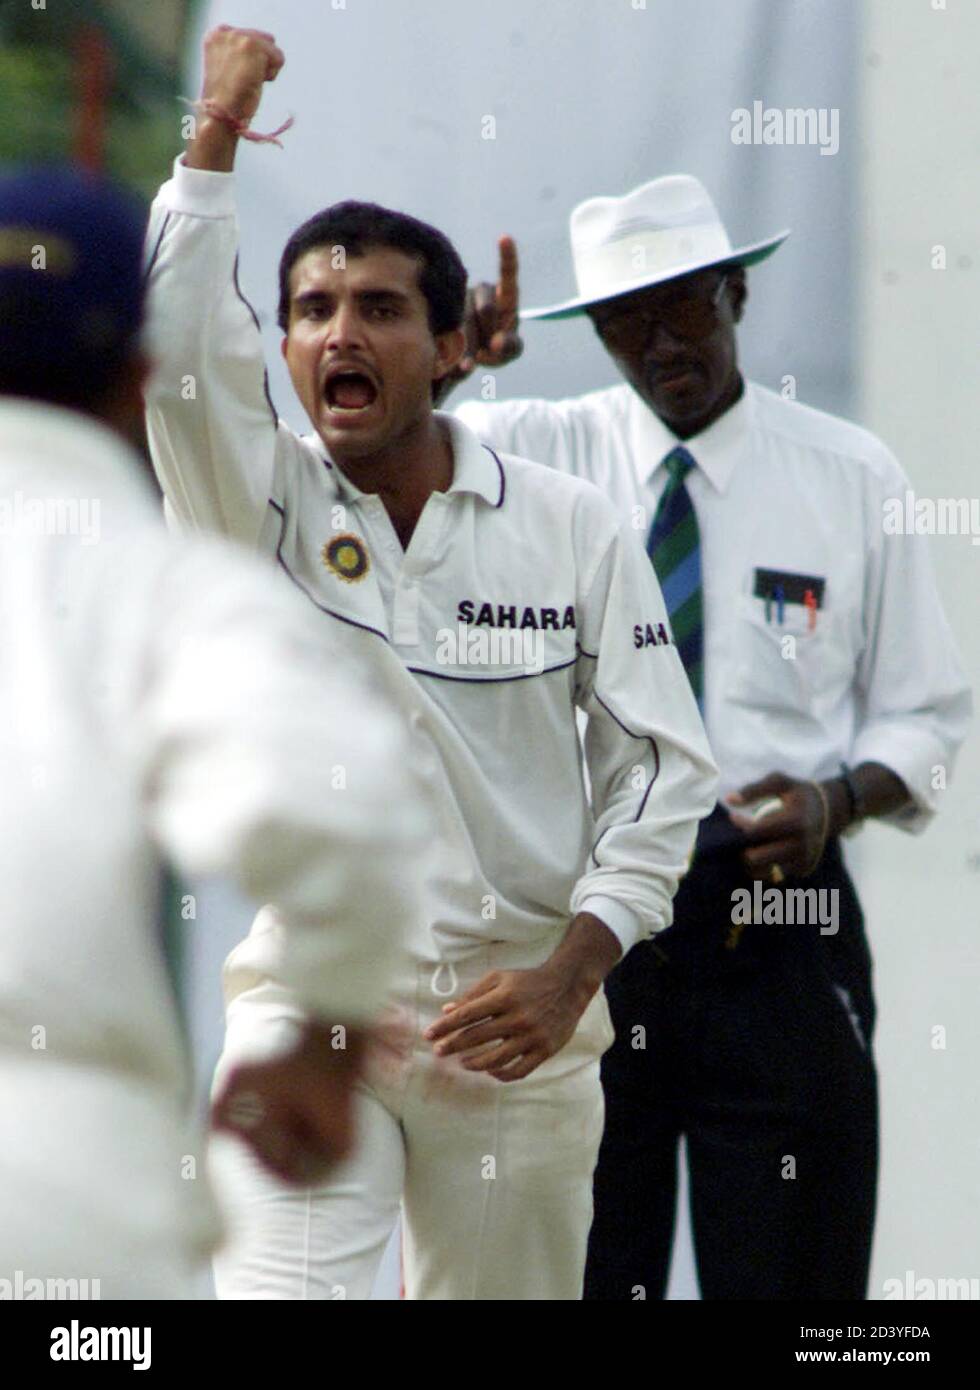 INDIAN SKIPPER SOURAV GANGULY CELEBRATES SRI LANKAN WICKET OF SURESH PERERA DURING THE SECOND TEST MATCH IN KANDY SRILANKA.   Indian skipper Sourav Ganguly (C) celebrates the wicket of Sri Lankan batsman Suresh Perera as umpire Steve Bucknor (R) signals his decision during the first day of their second test in Kandy, Sri Lanka August 22, 2001. Stock Photo